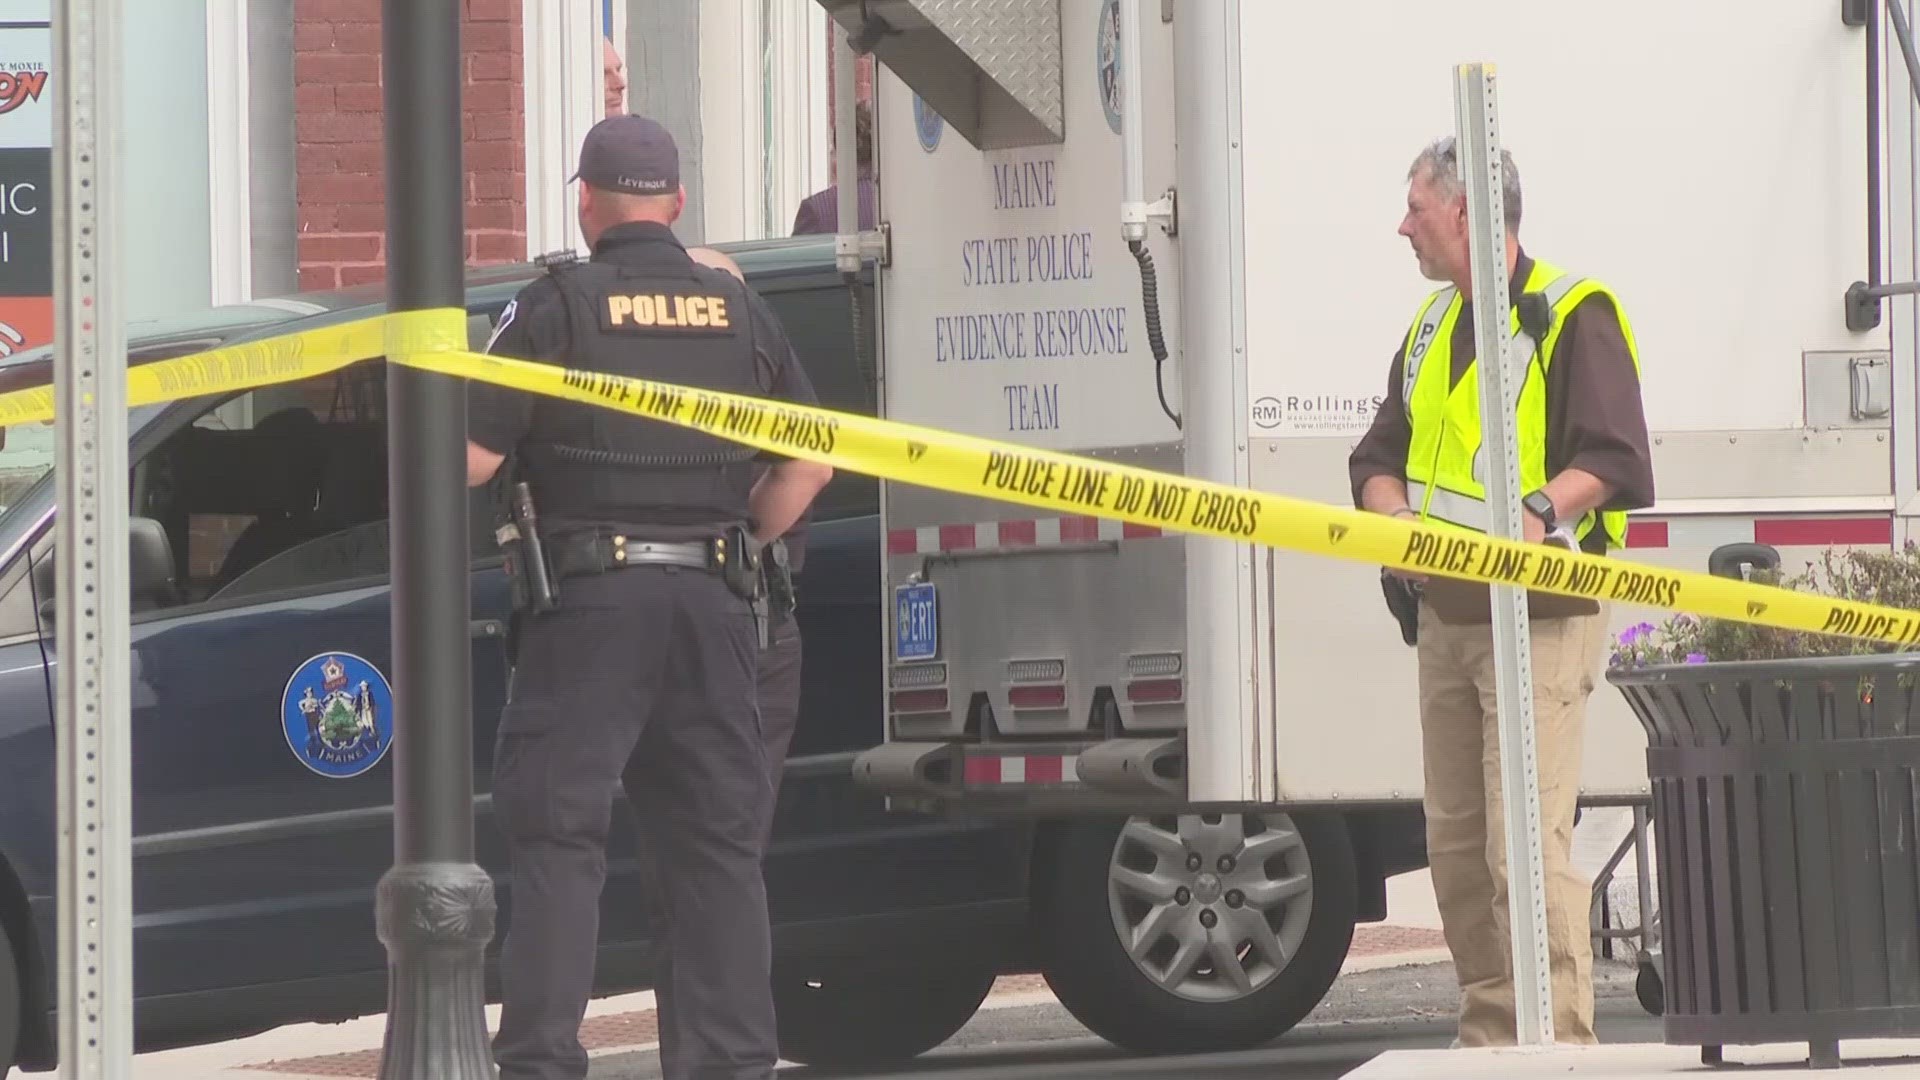 Main Street in the downtown area was shut down for several hours while detectives investigated.